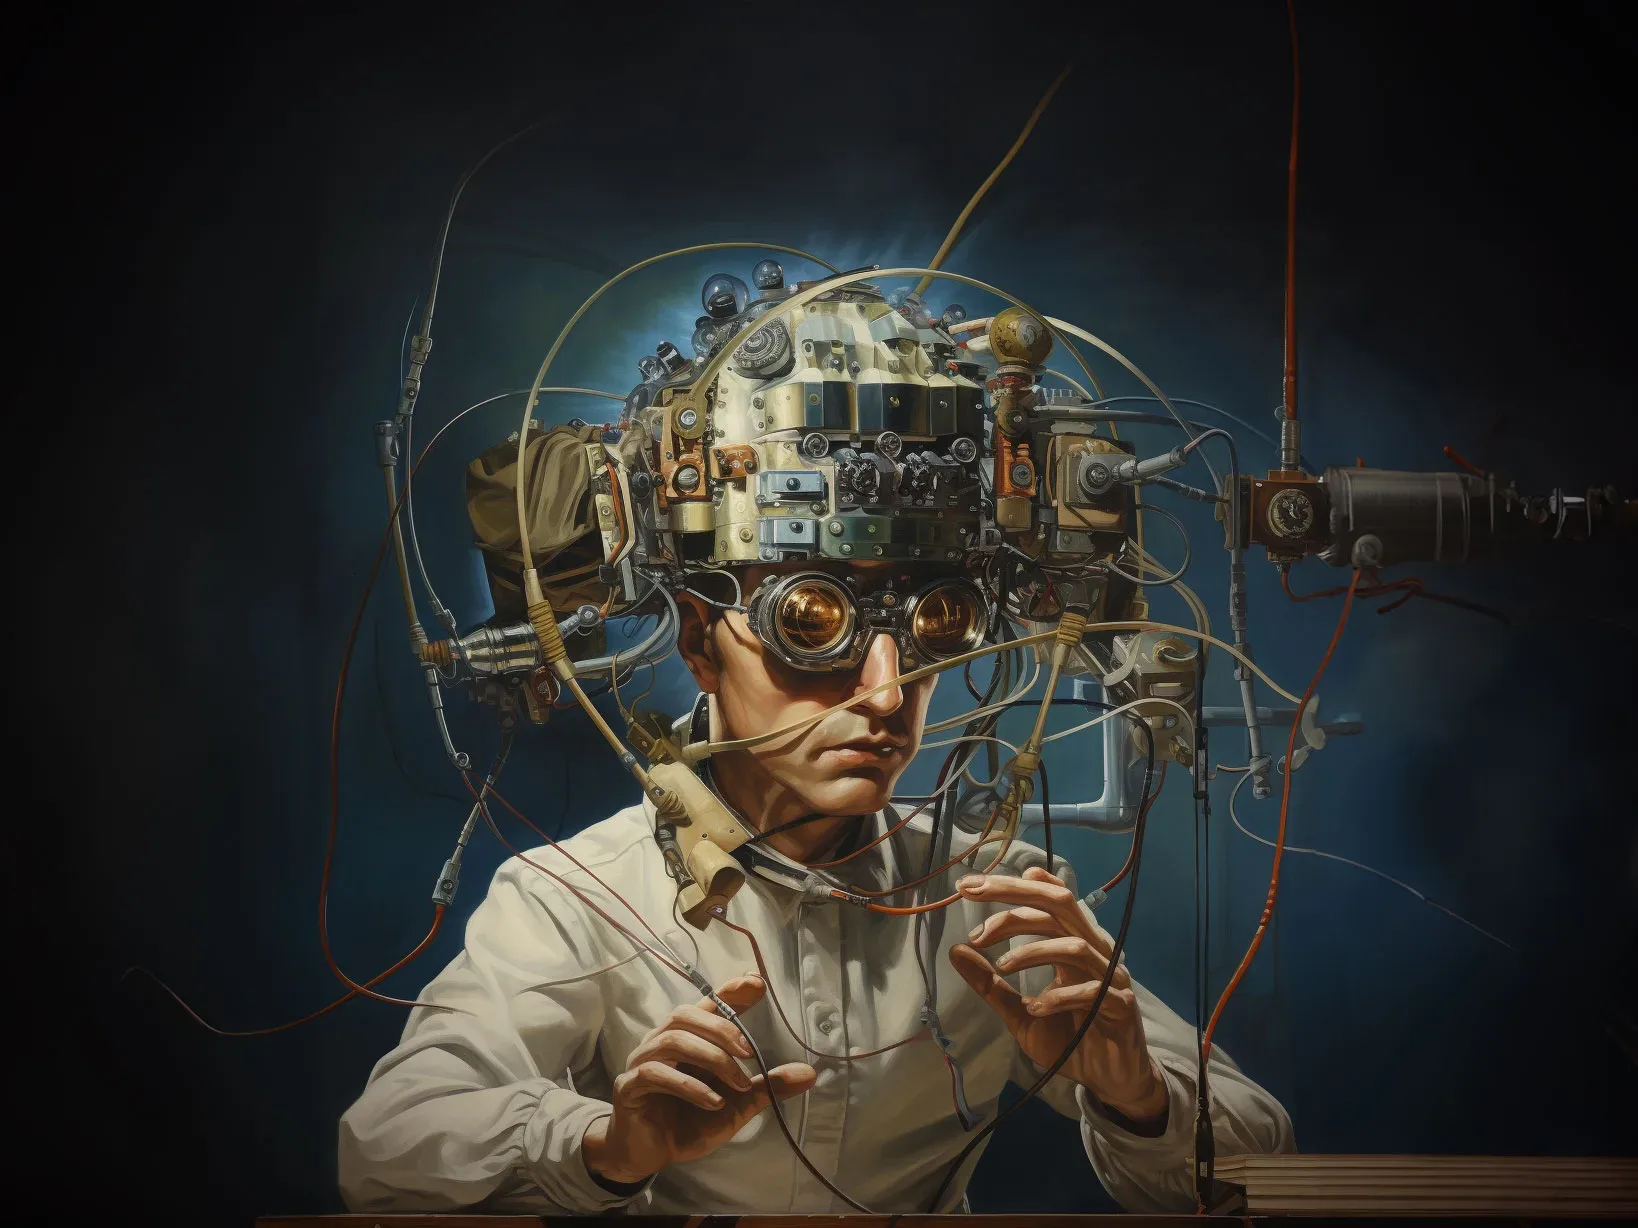 Artistic image of a man with a over-complicated apparatus on his head filled with wires and tubes.